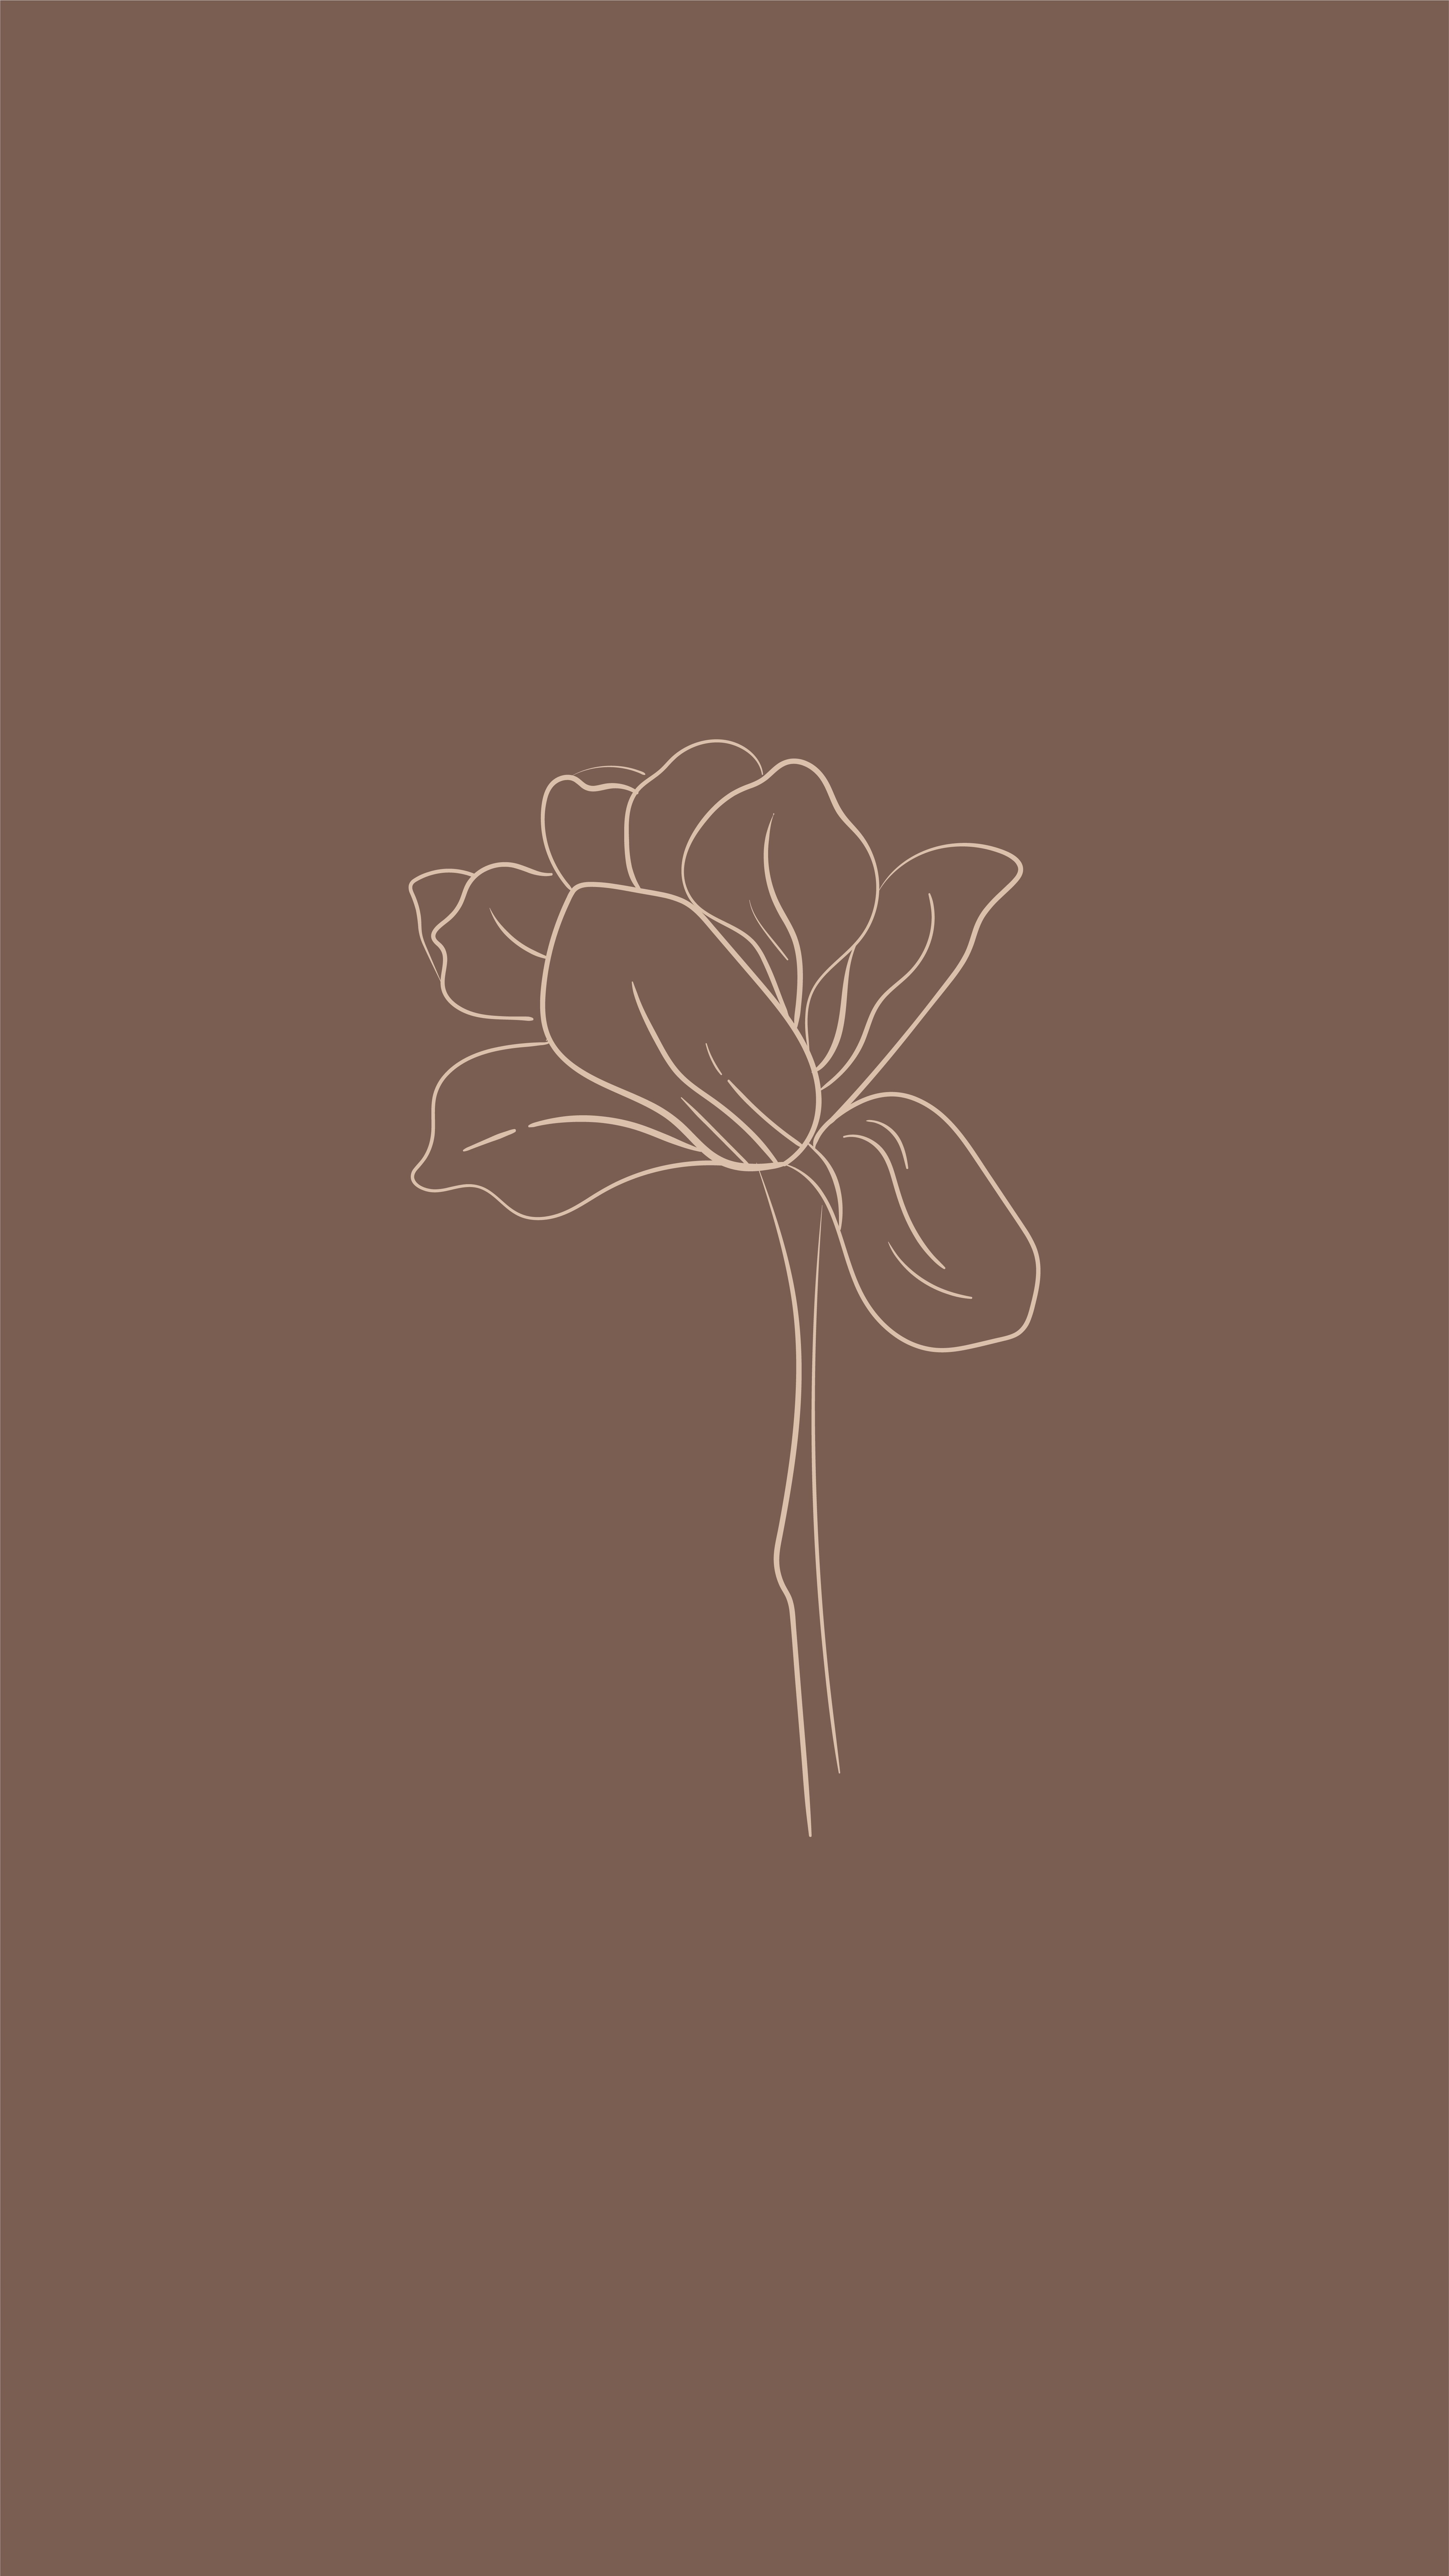 A single line drawing of an open flower on brown background - Brown, light brown, hand drawn